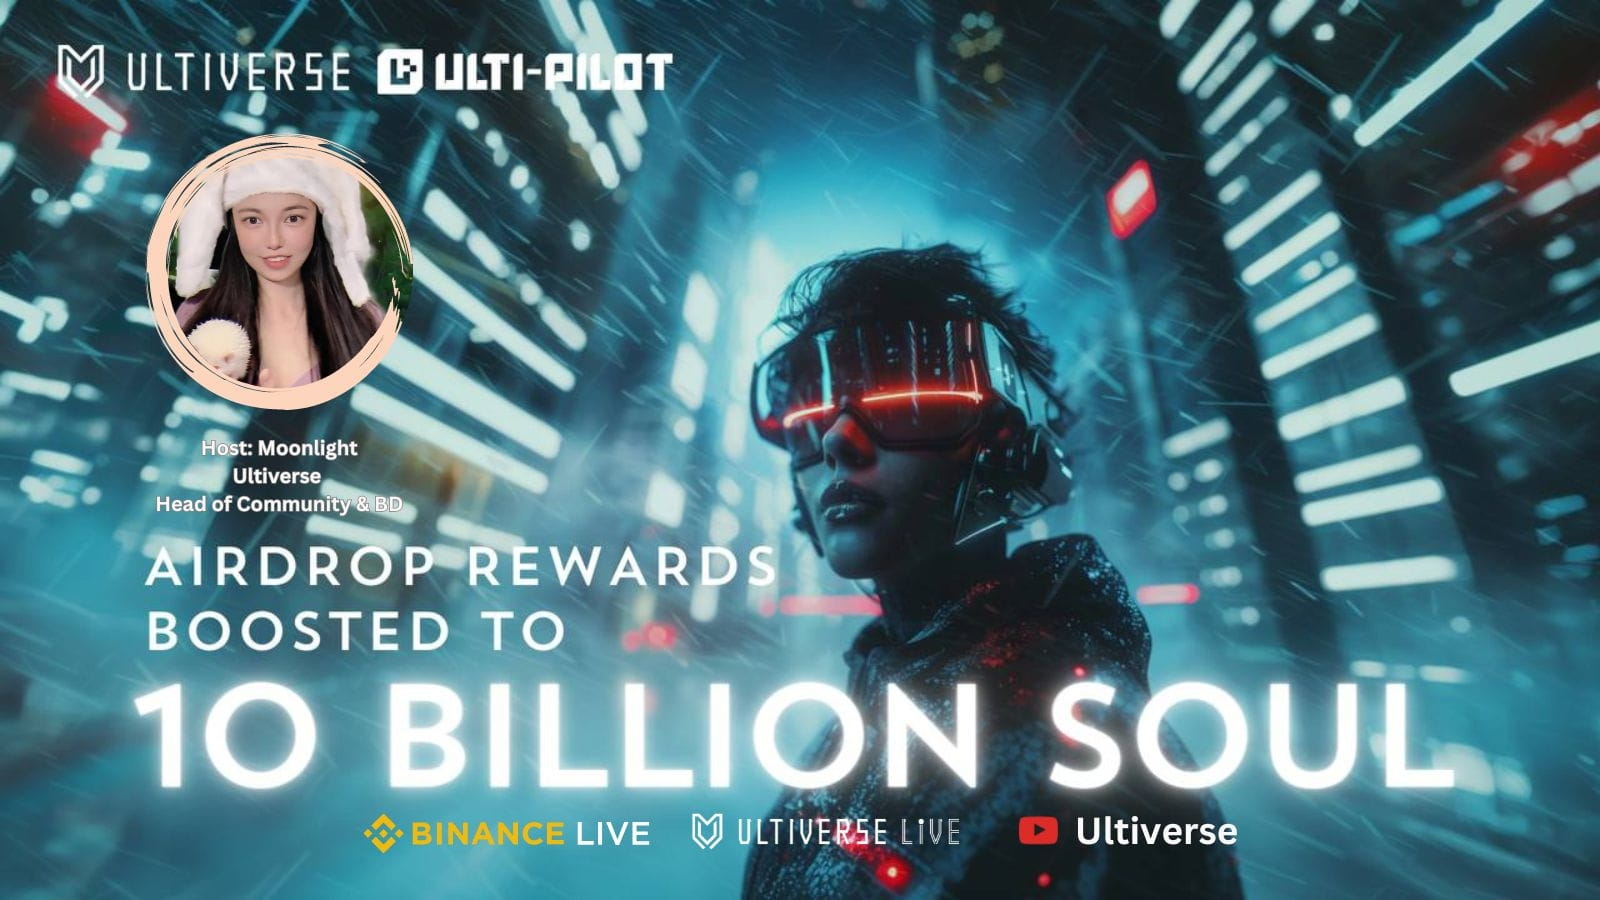 10 Billion SOUL Airdrops! Ultiverse Live with Moonlight